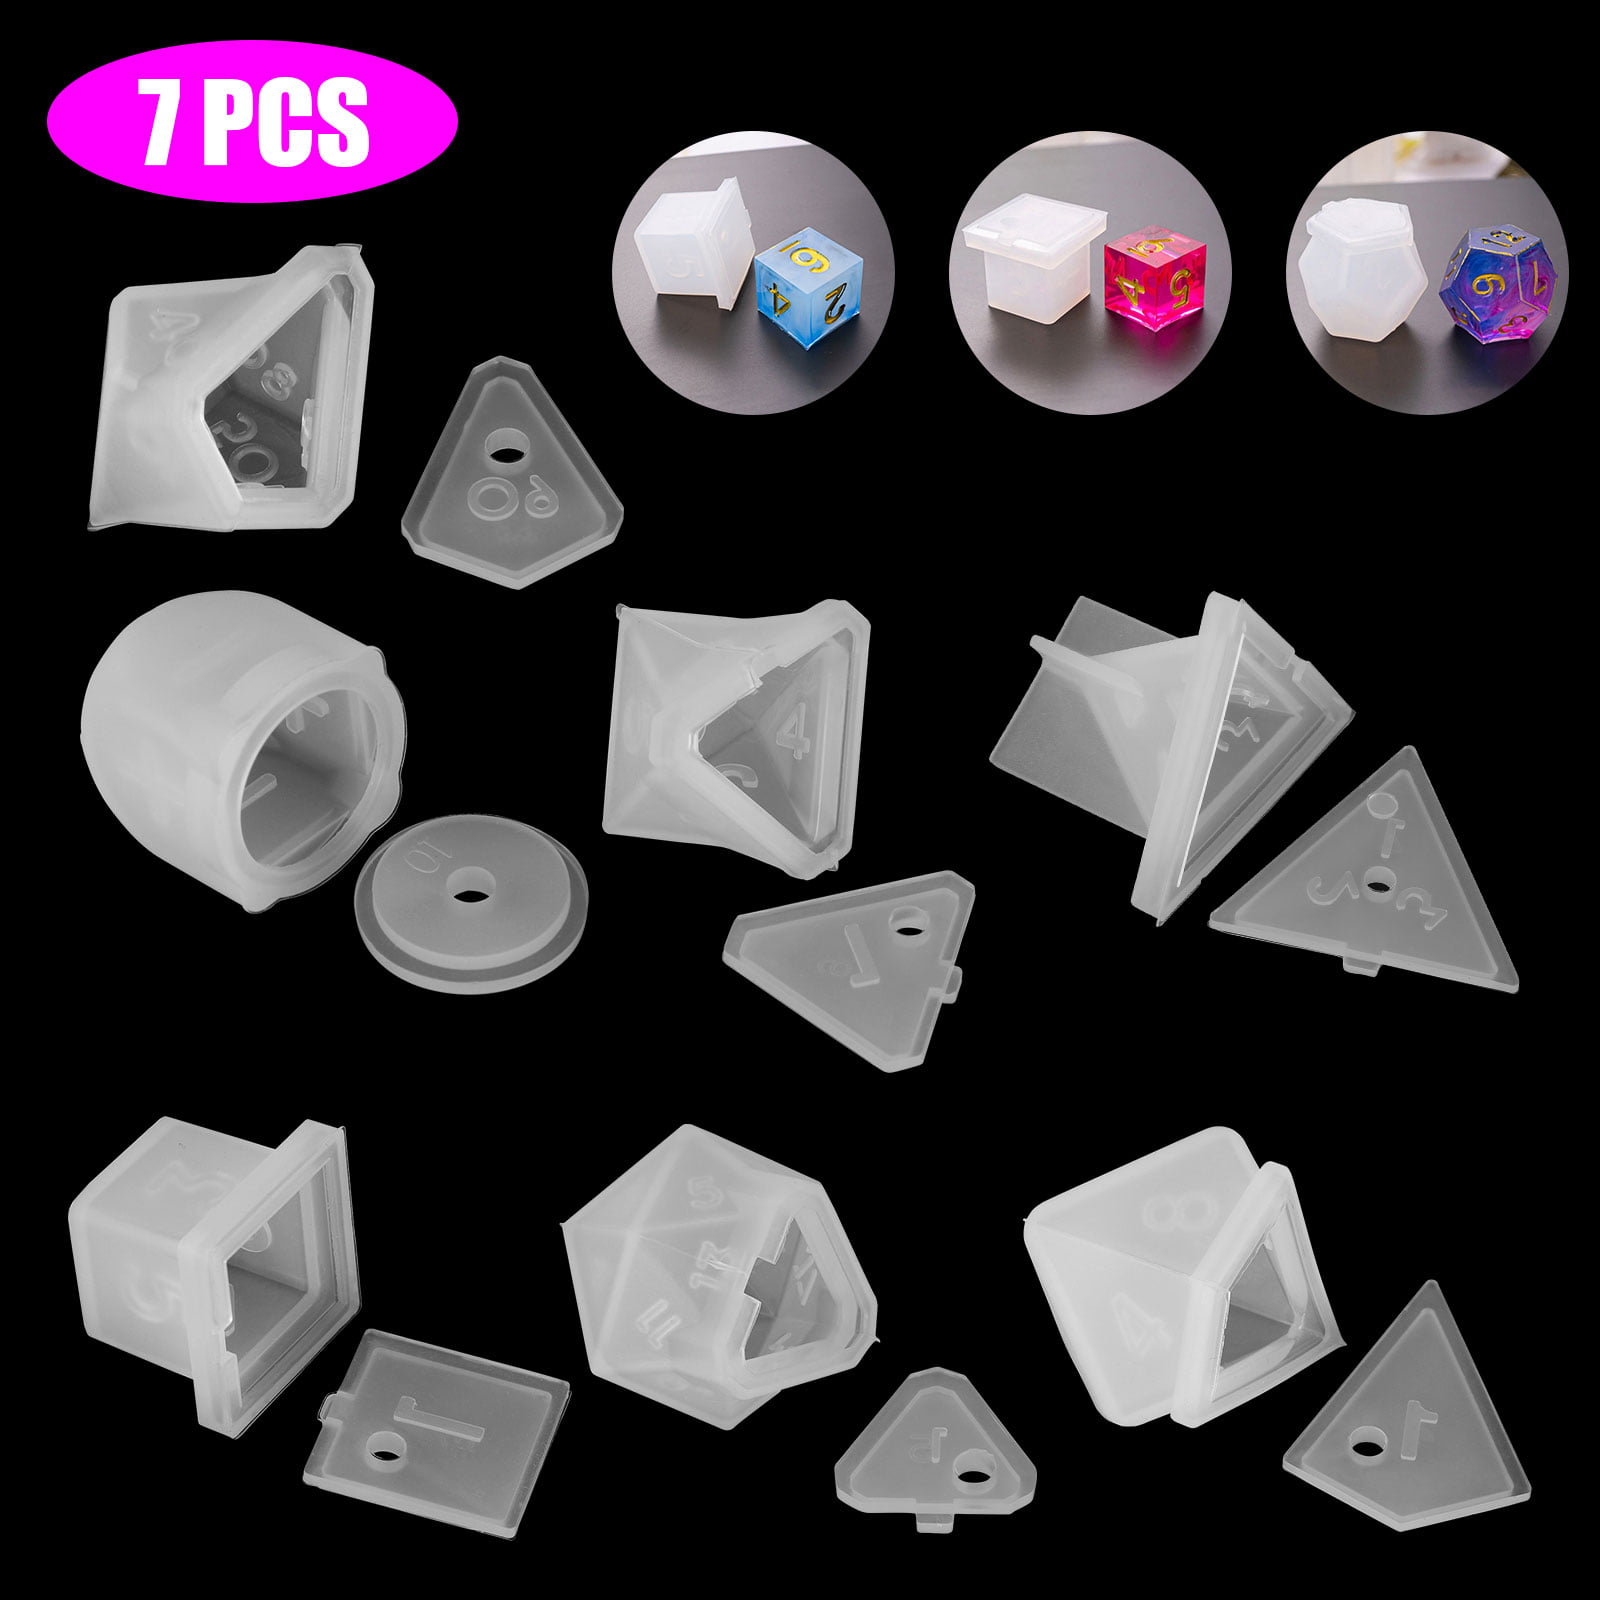 Cube Cone Diamond,Epoxy Resin Craft Molds with Measurement Cup and Wood Sticks for DIY Home Decoration JMSWENJUAN 18 Pcs Silicone Resin Mold Resin Casting Molds Including Sphere Pyramid Stone